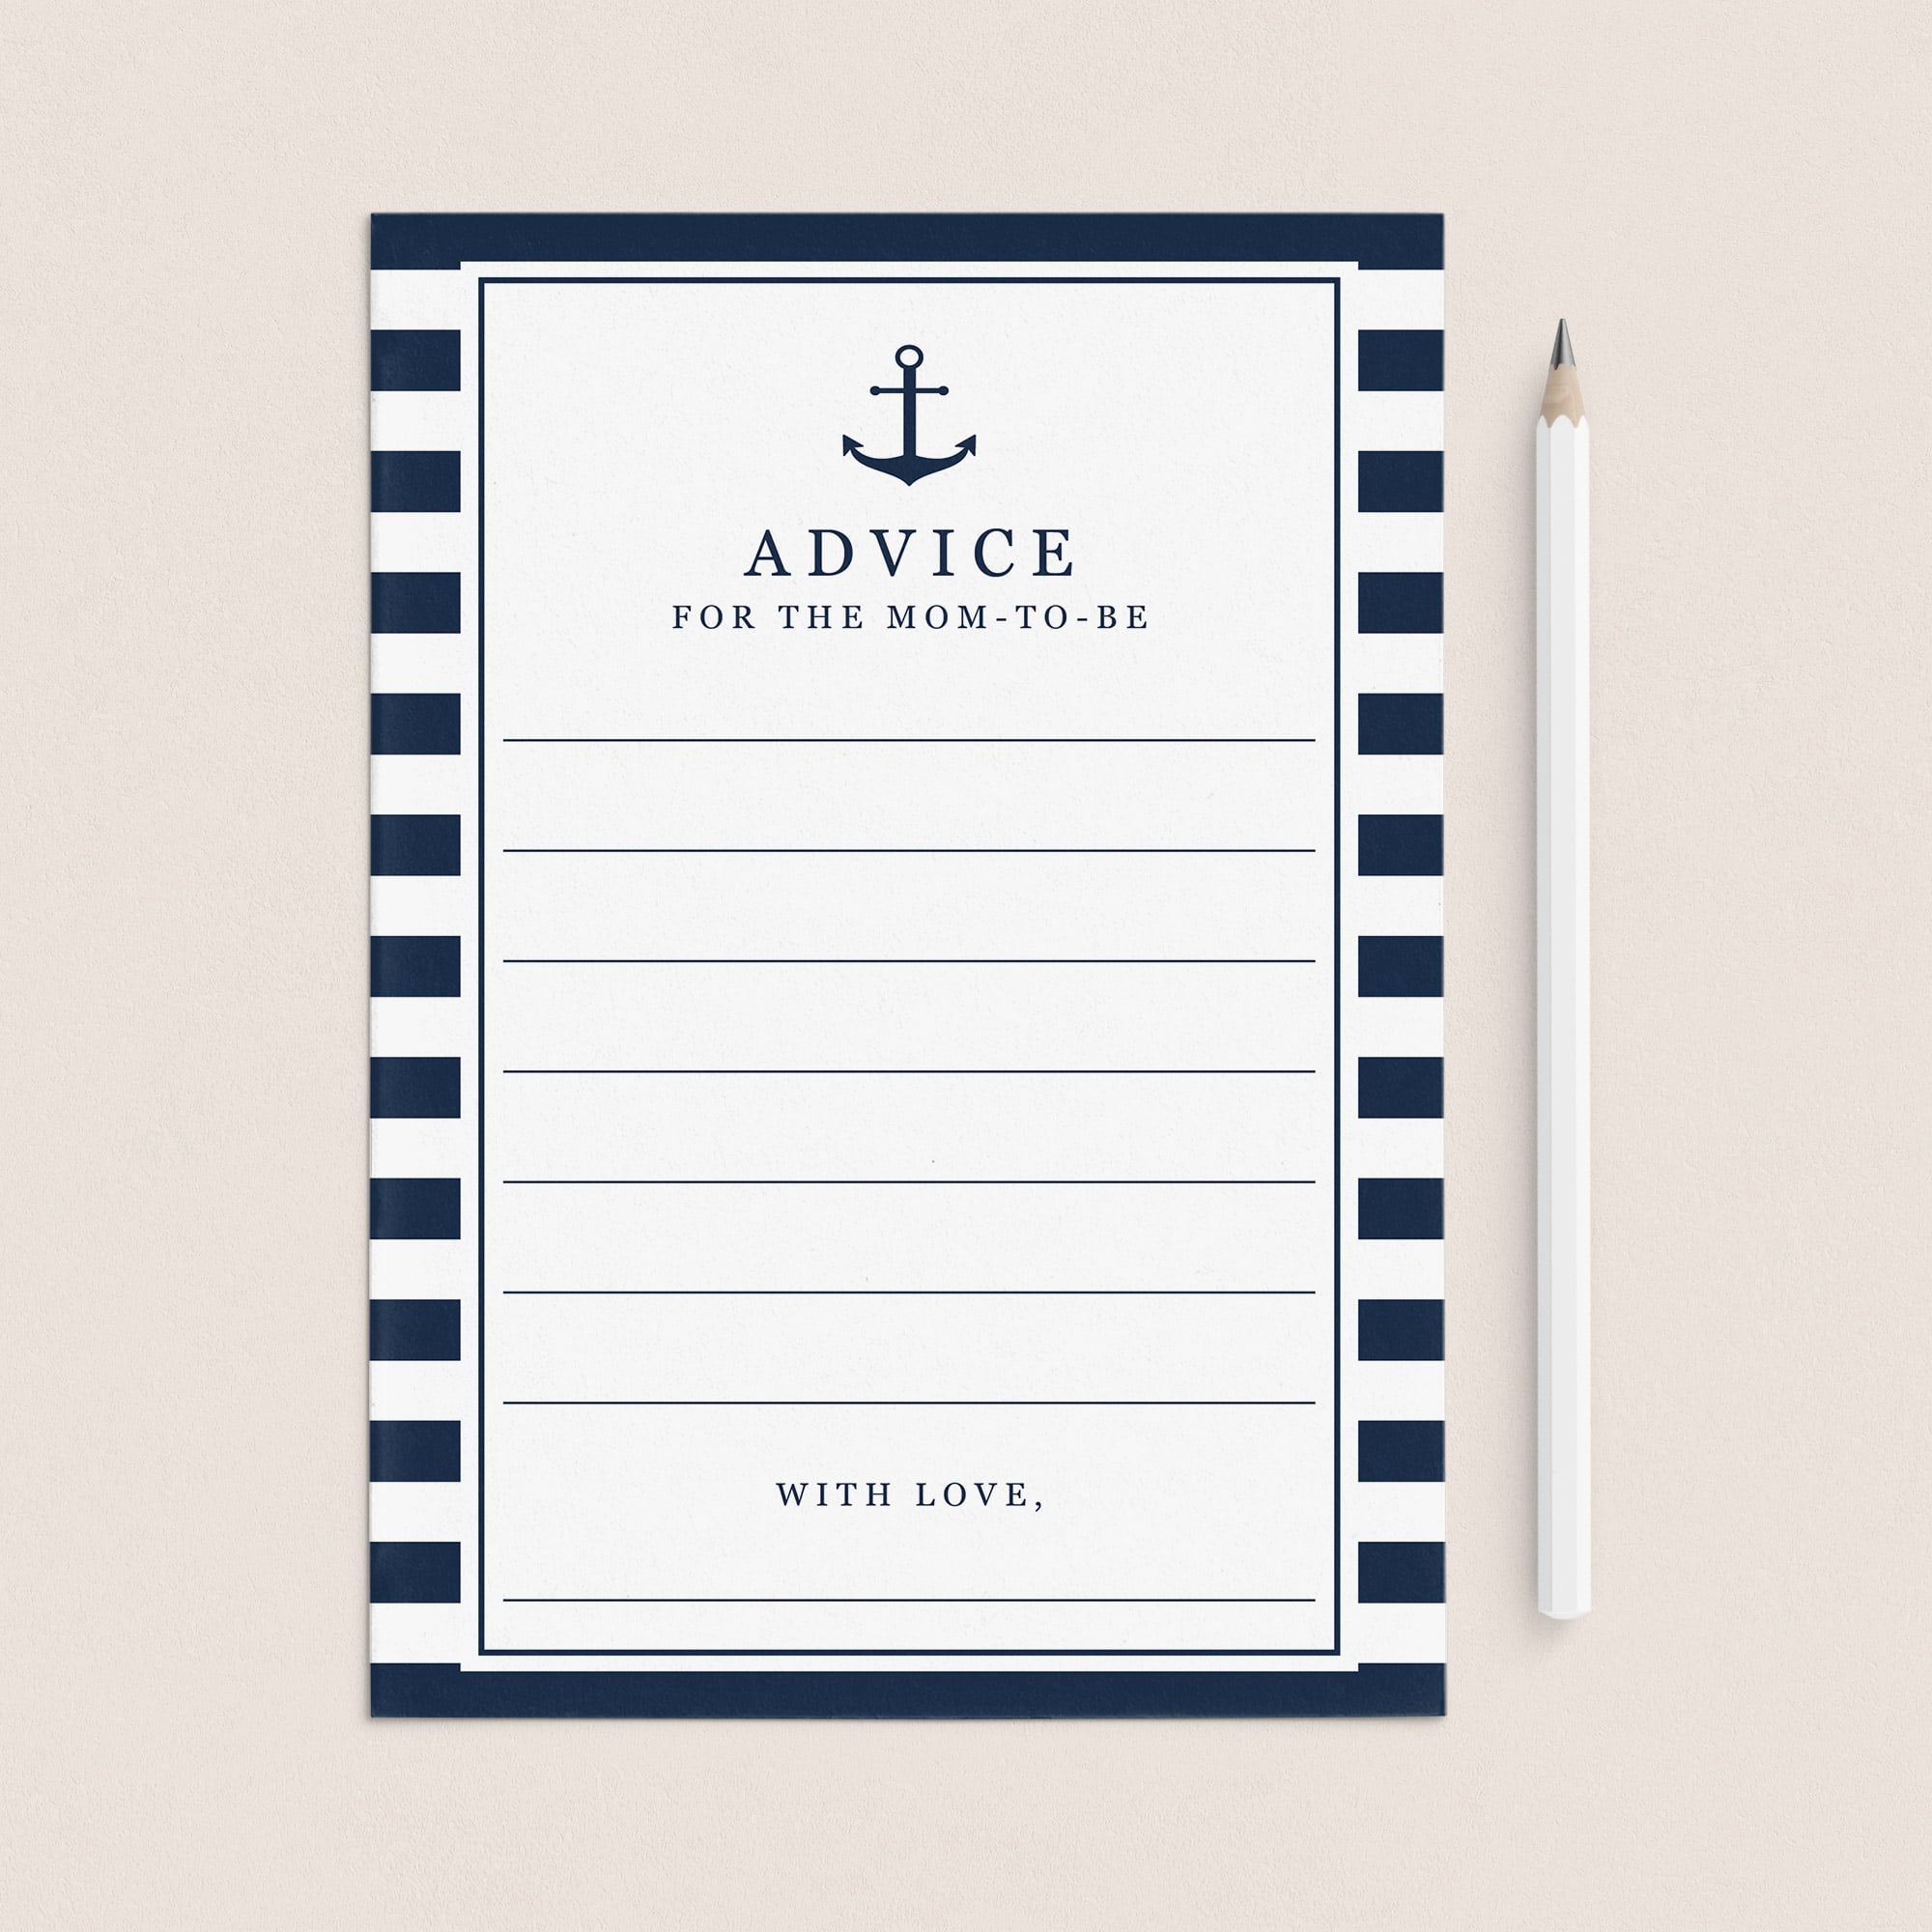 Printable Nautical Advice Cards by LittleSizzle